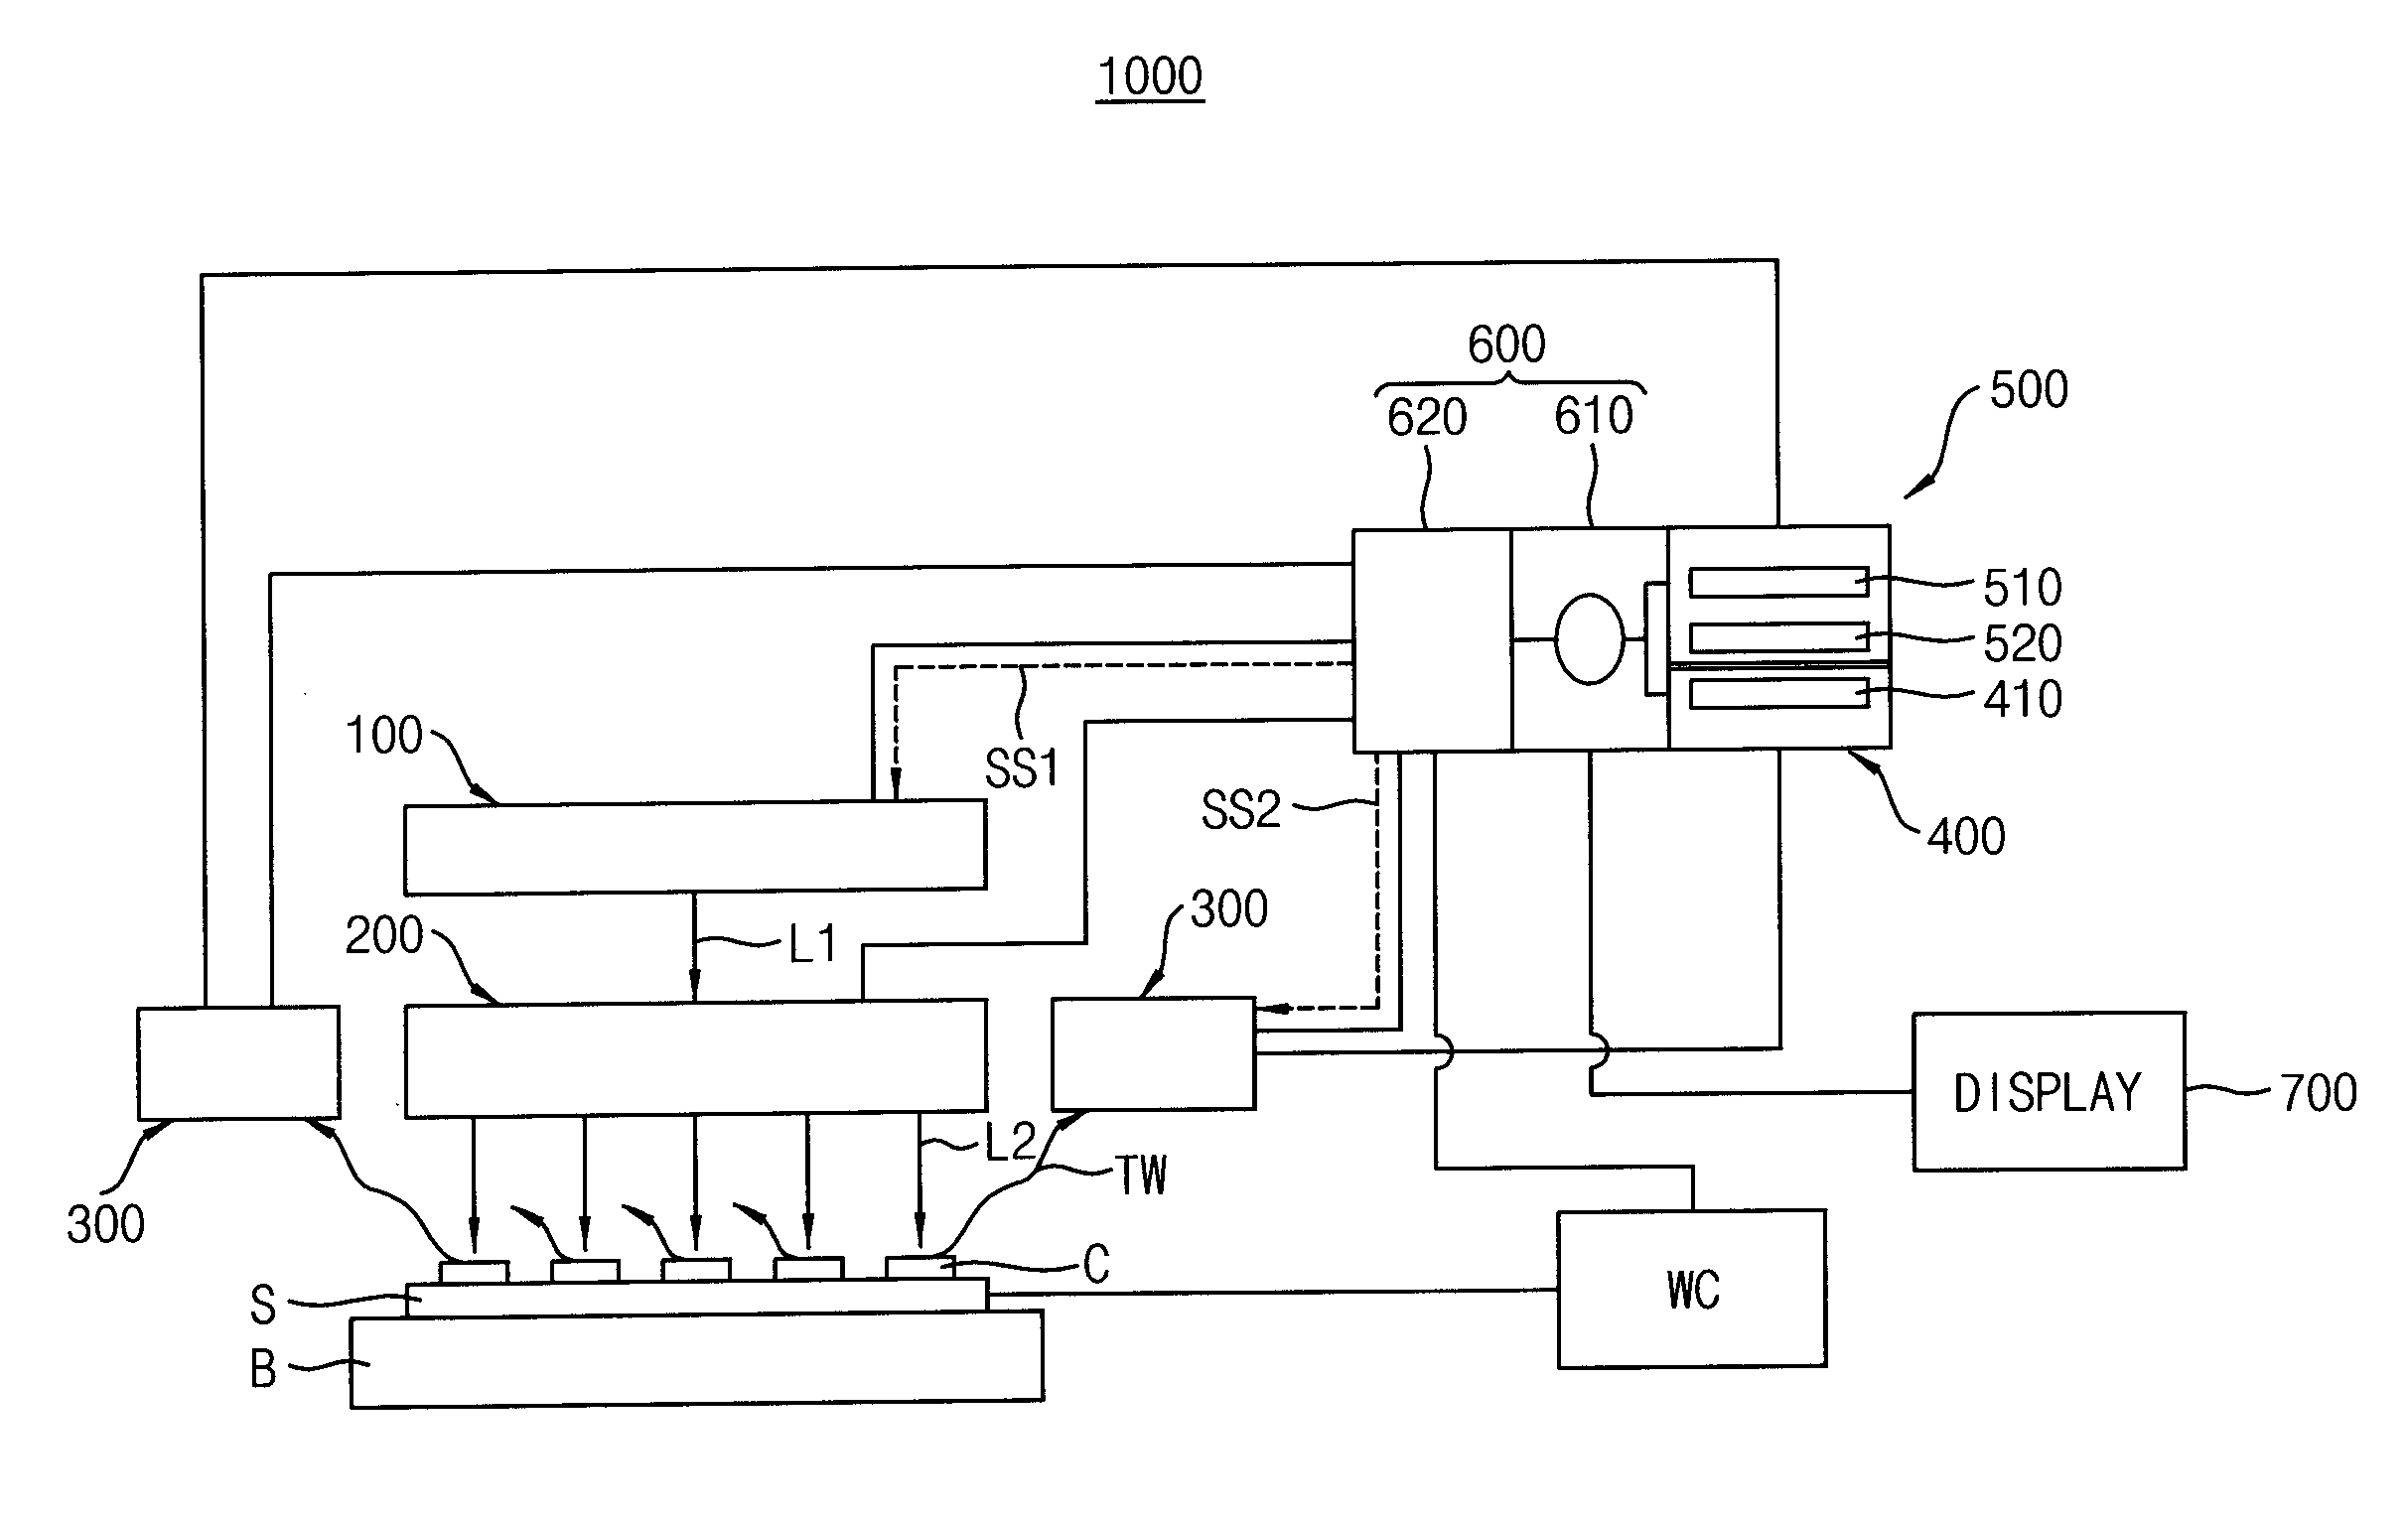 Surface inspection apparatus for semiconductor chips